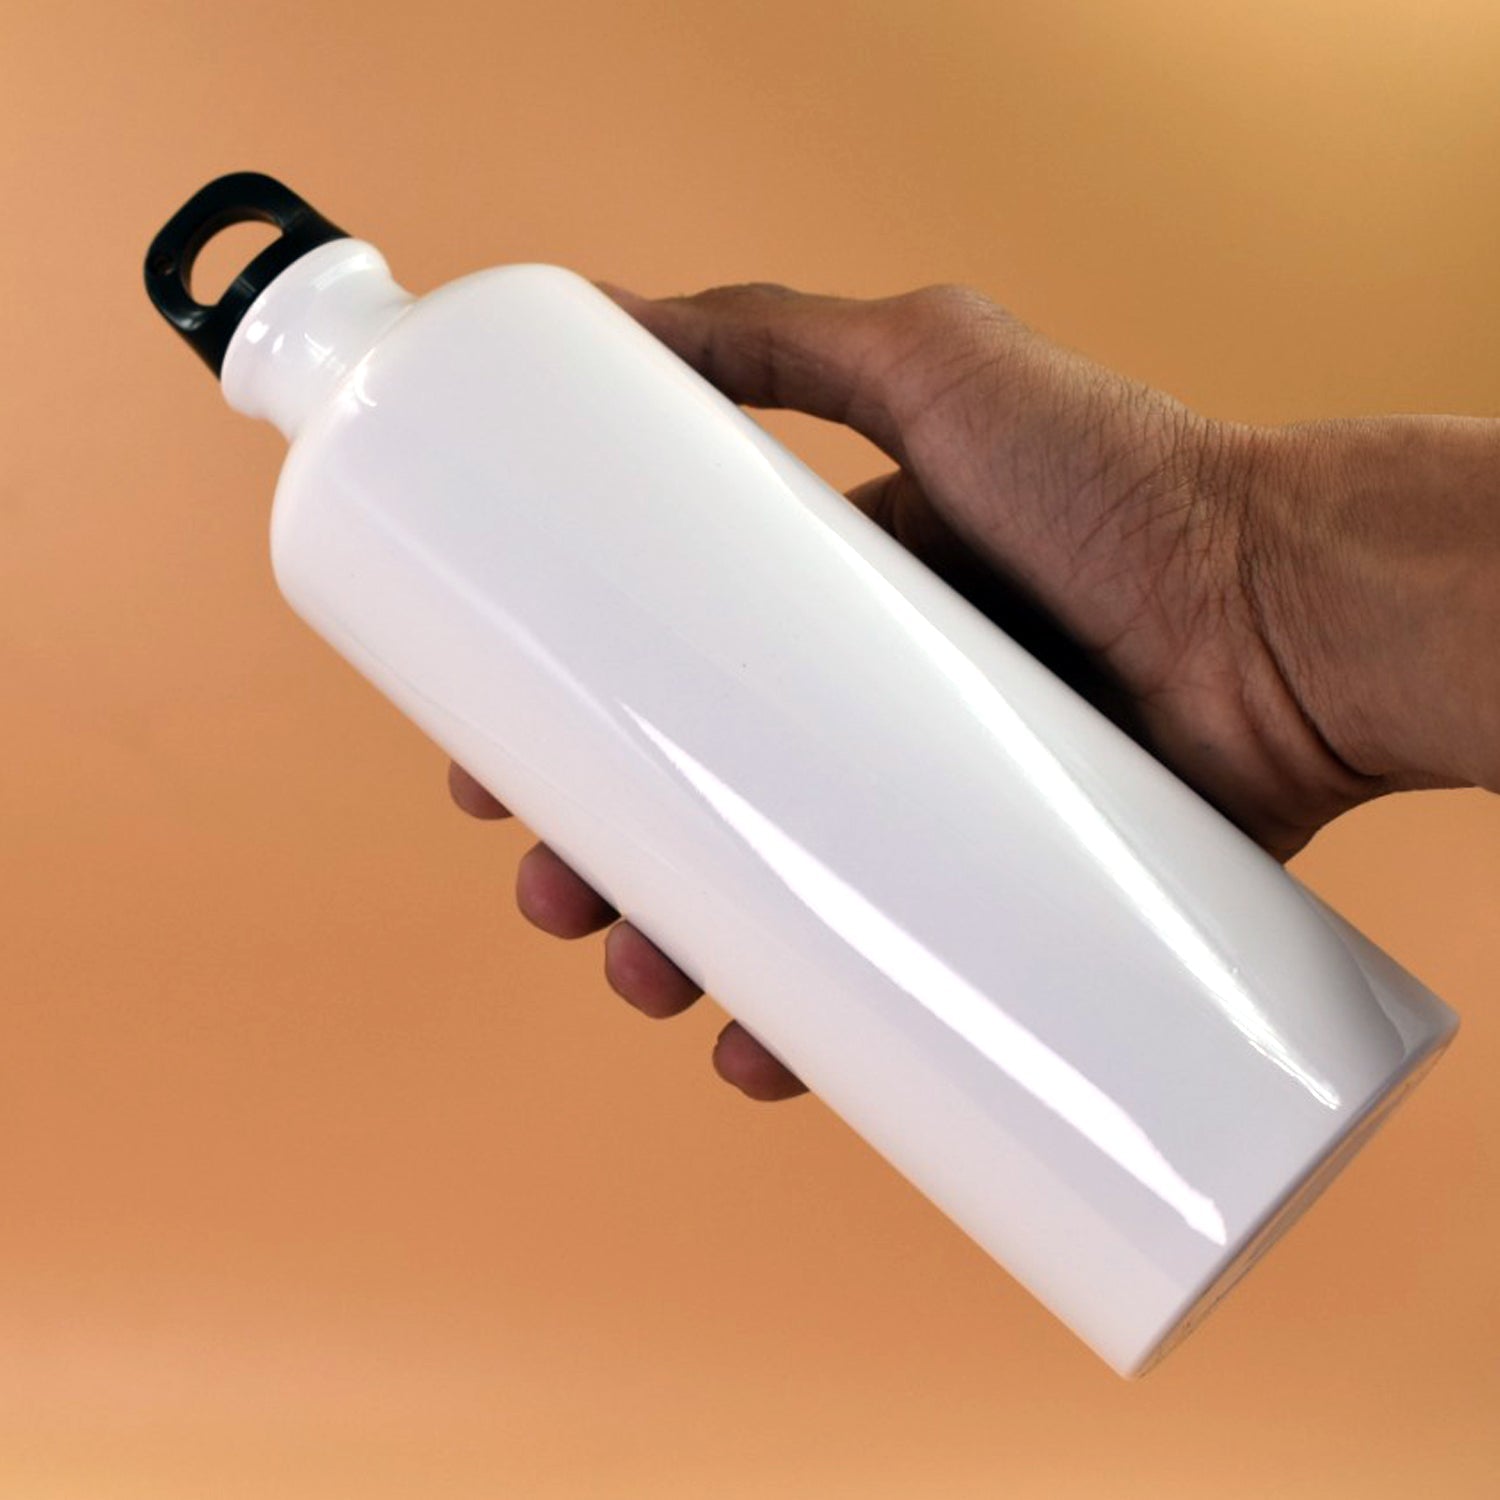 6083 CNB Bottle 2 used in all kinds of places like household and official for storing and drinking water and some beverages etc. freeshipping - DeoDap